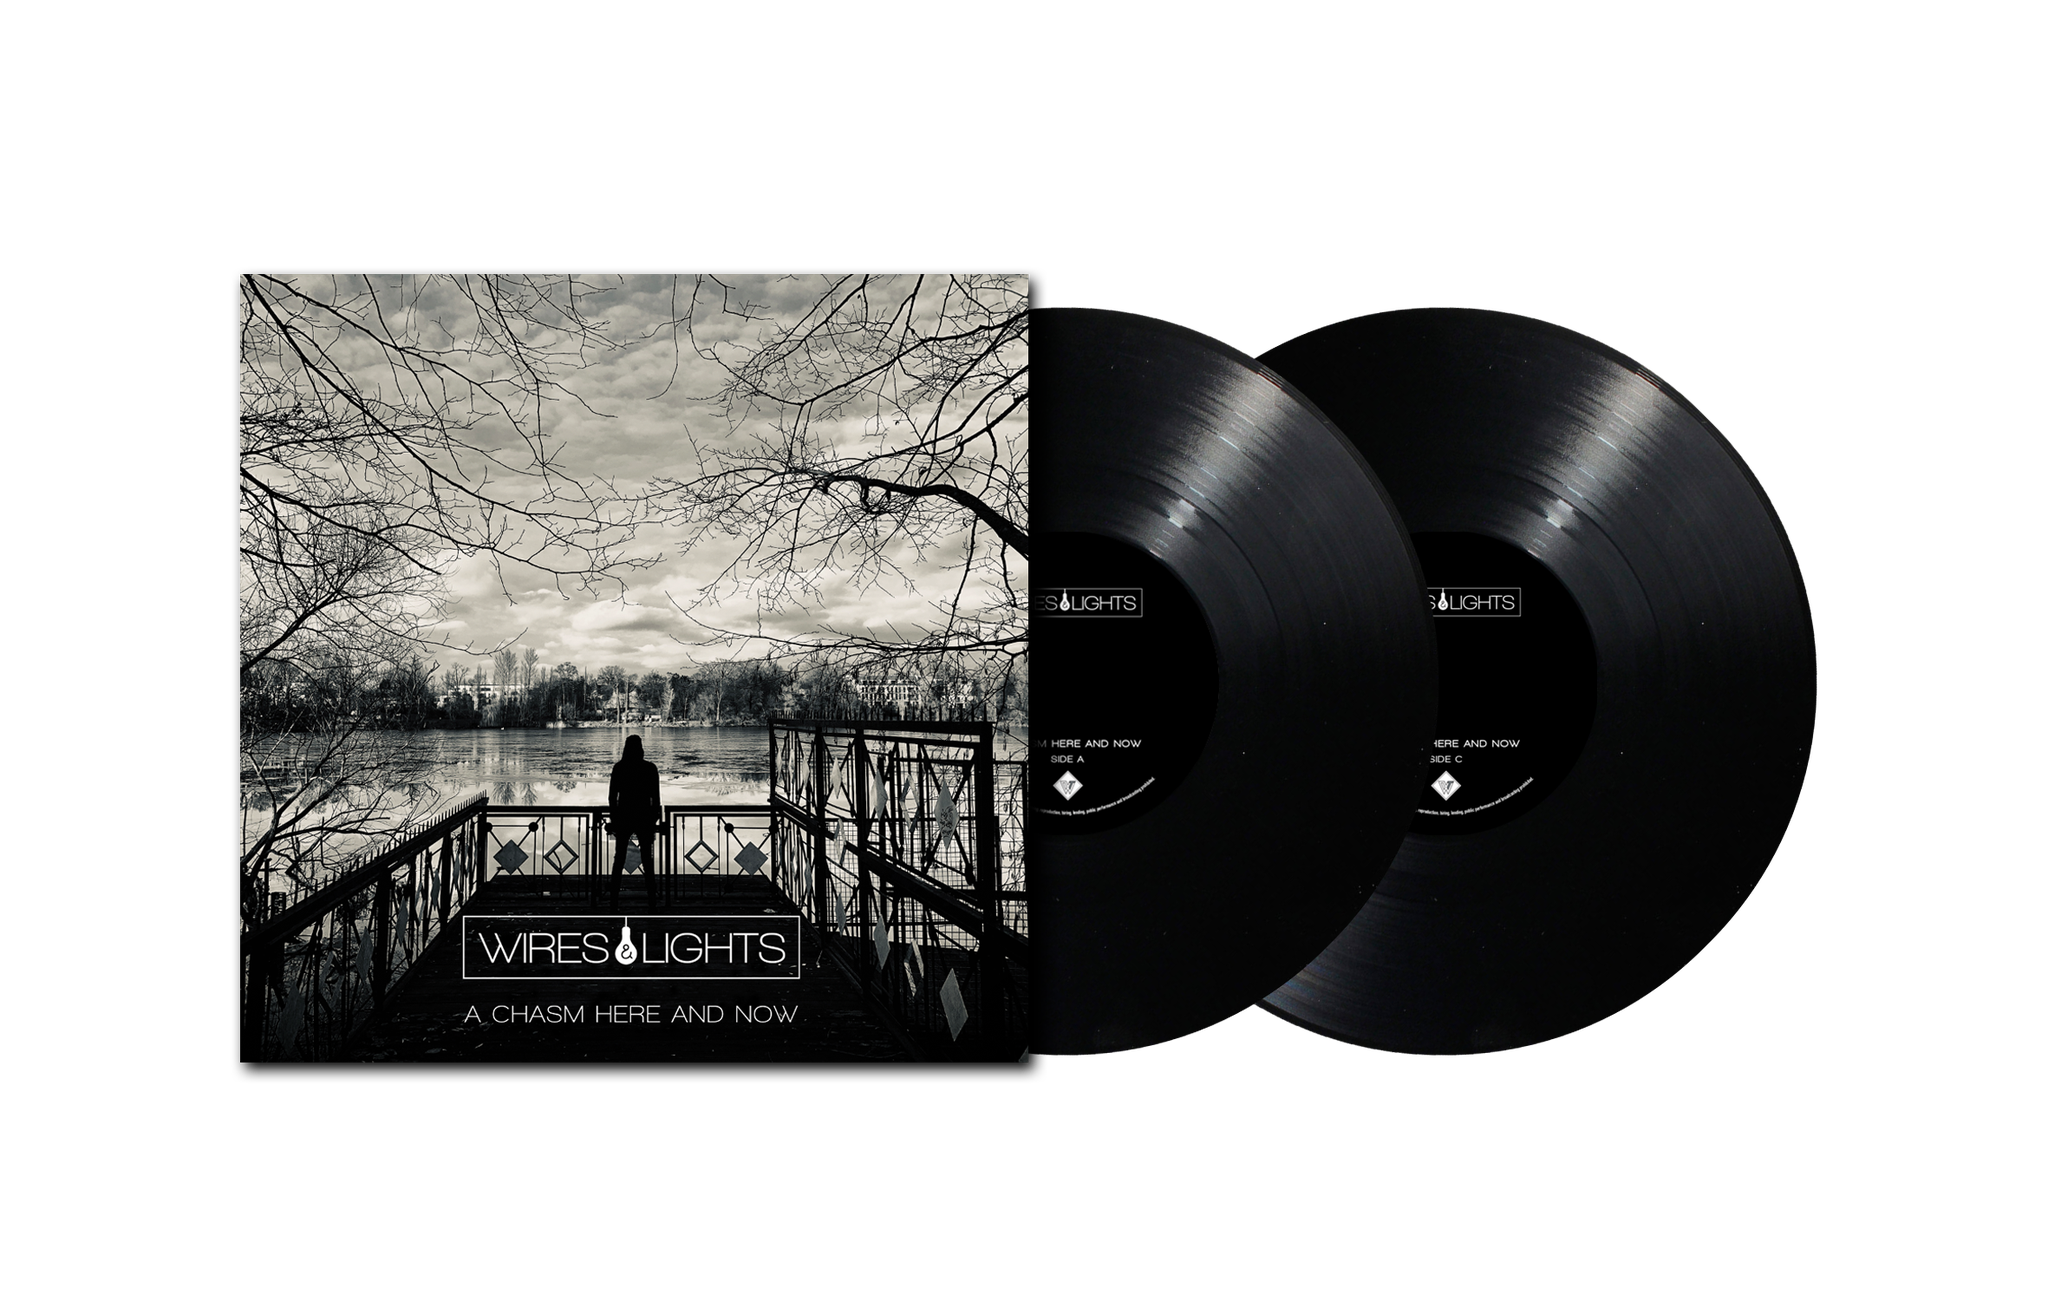 A Chasm Here And Now vinyl limited edition